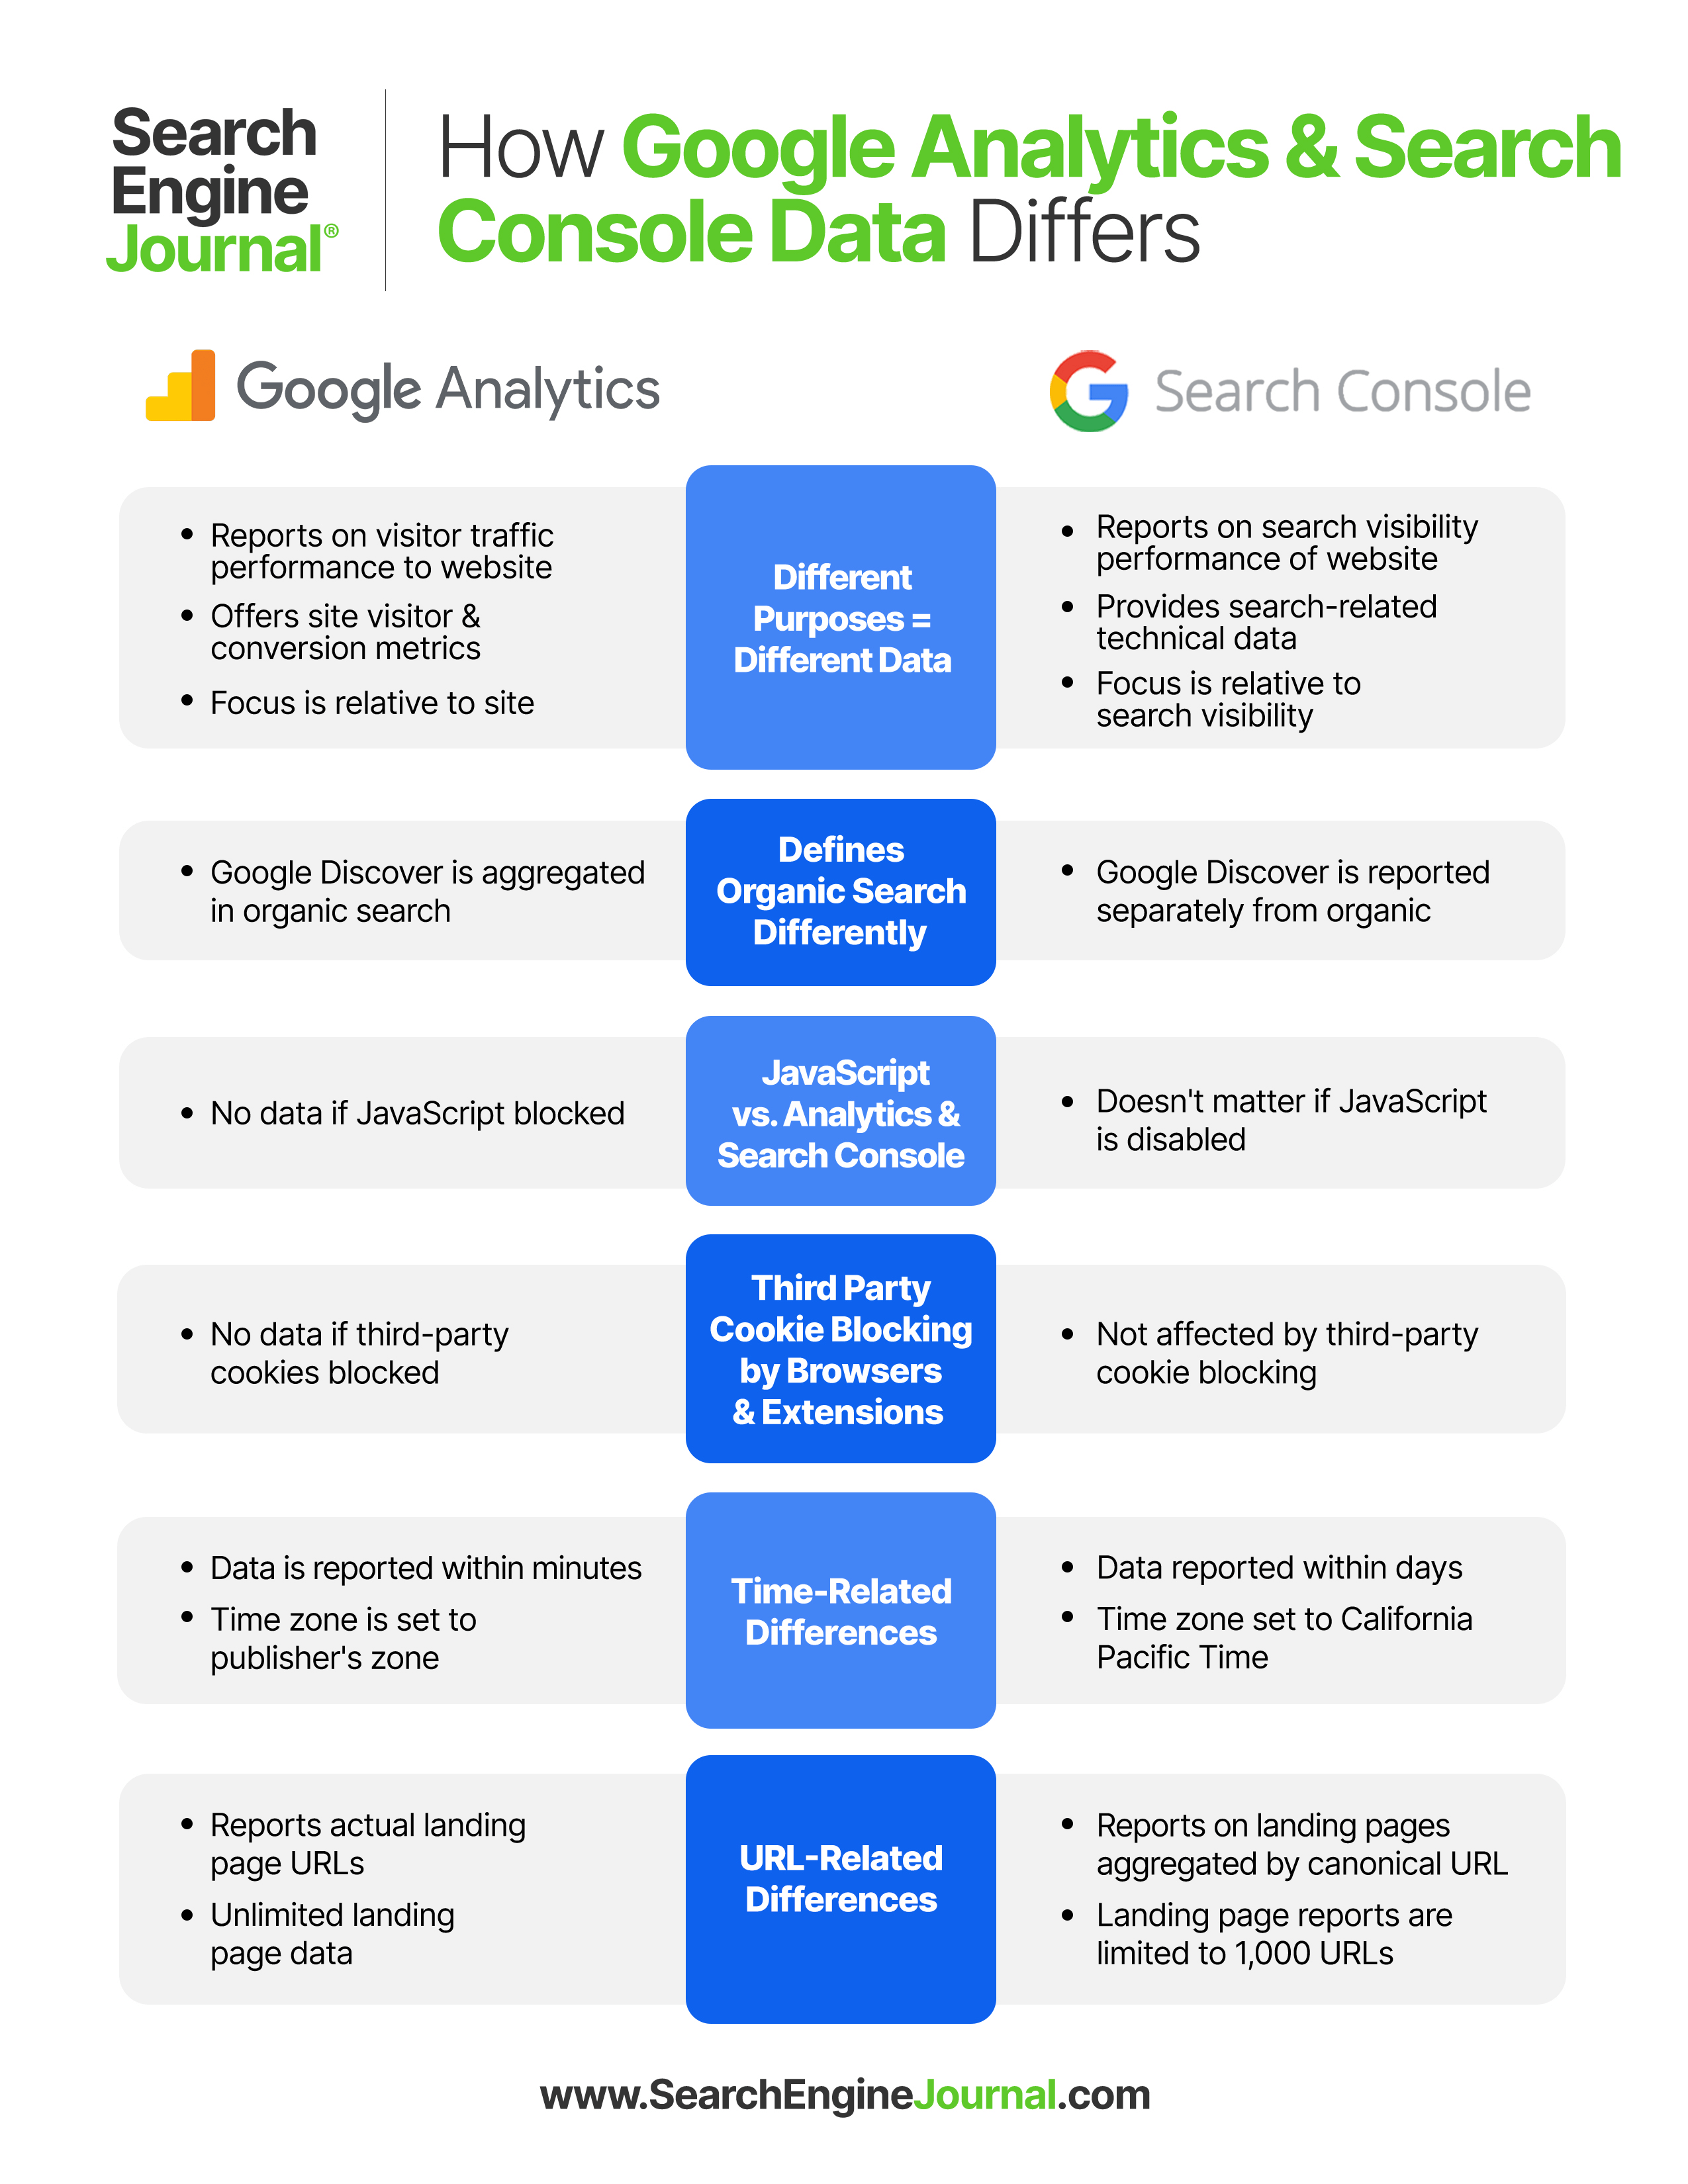 Google Analytics vs Goodle Search Console infographic